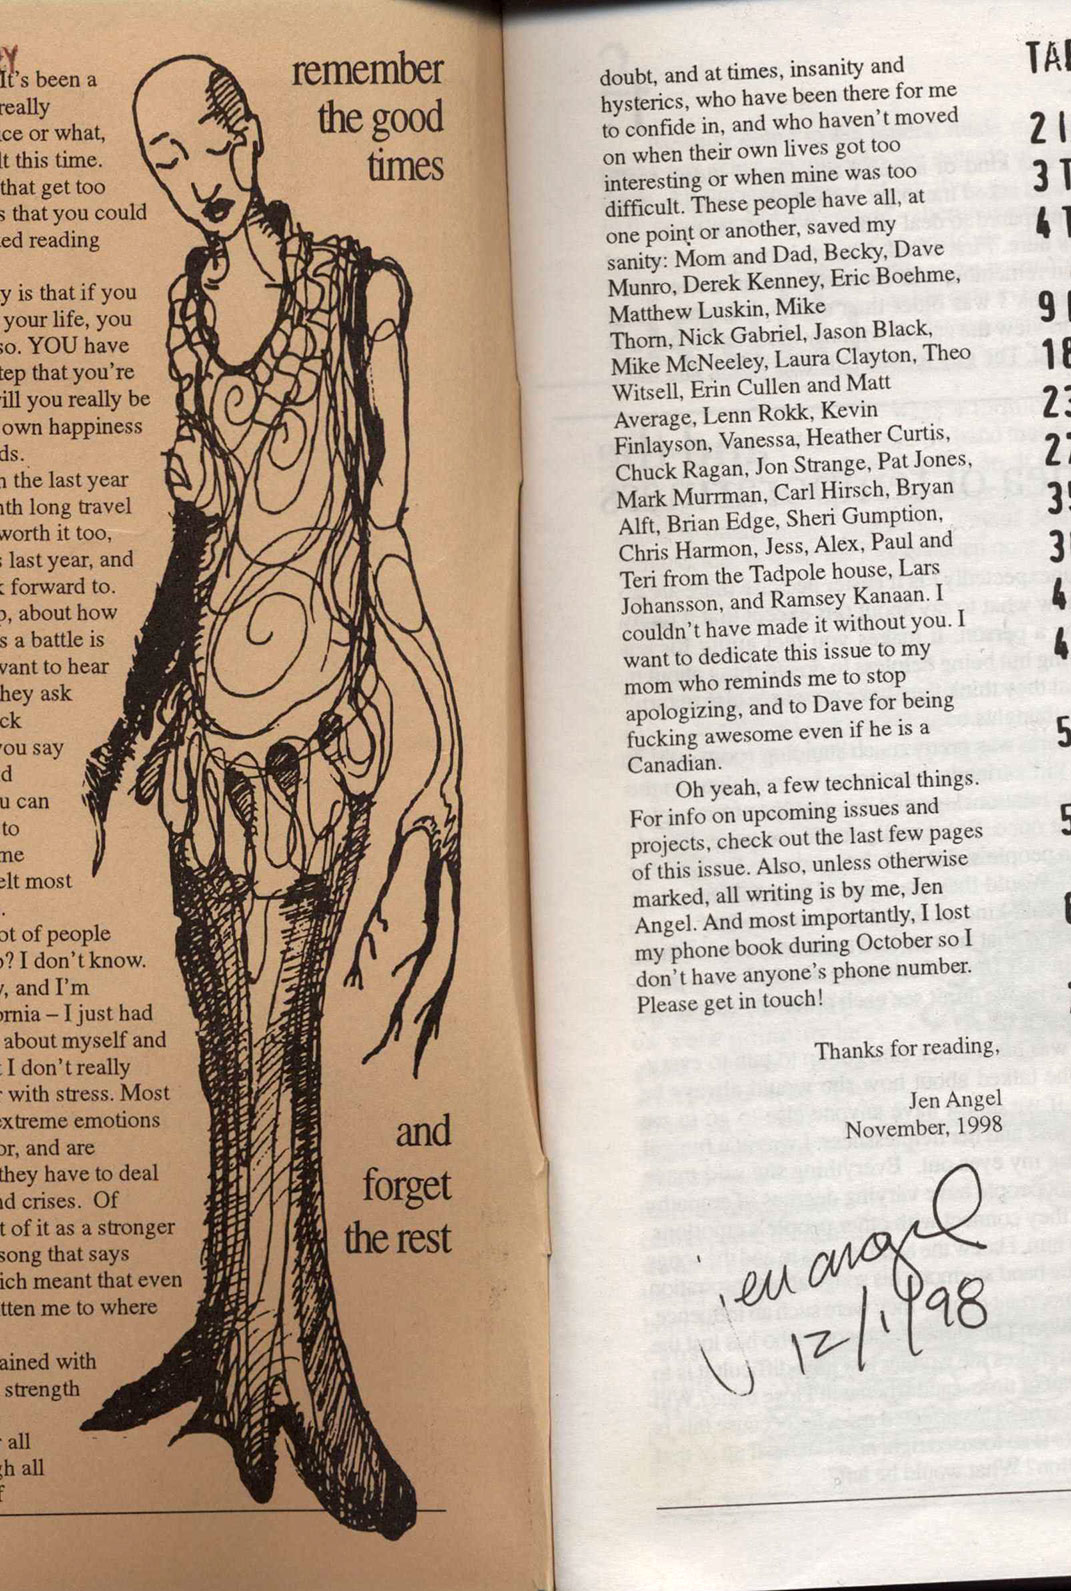 excerpt from zine intro: drawing of an androgynous anthropomorphic tree, text that reads "remember the good times...and forget the rest" on one page and on the other, a long list of thanks and Jen Angel's signature, dated 12/1/98